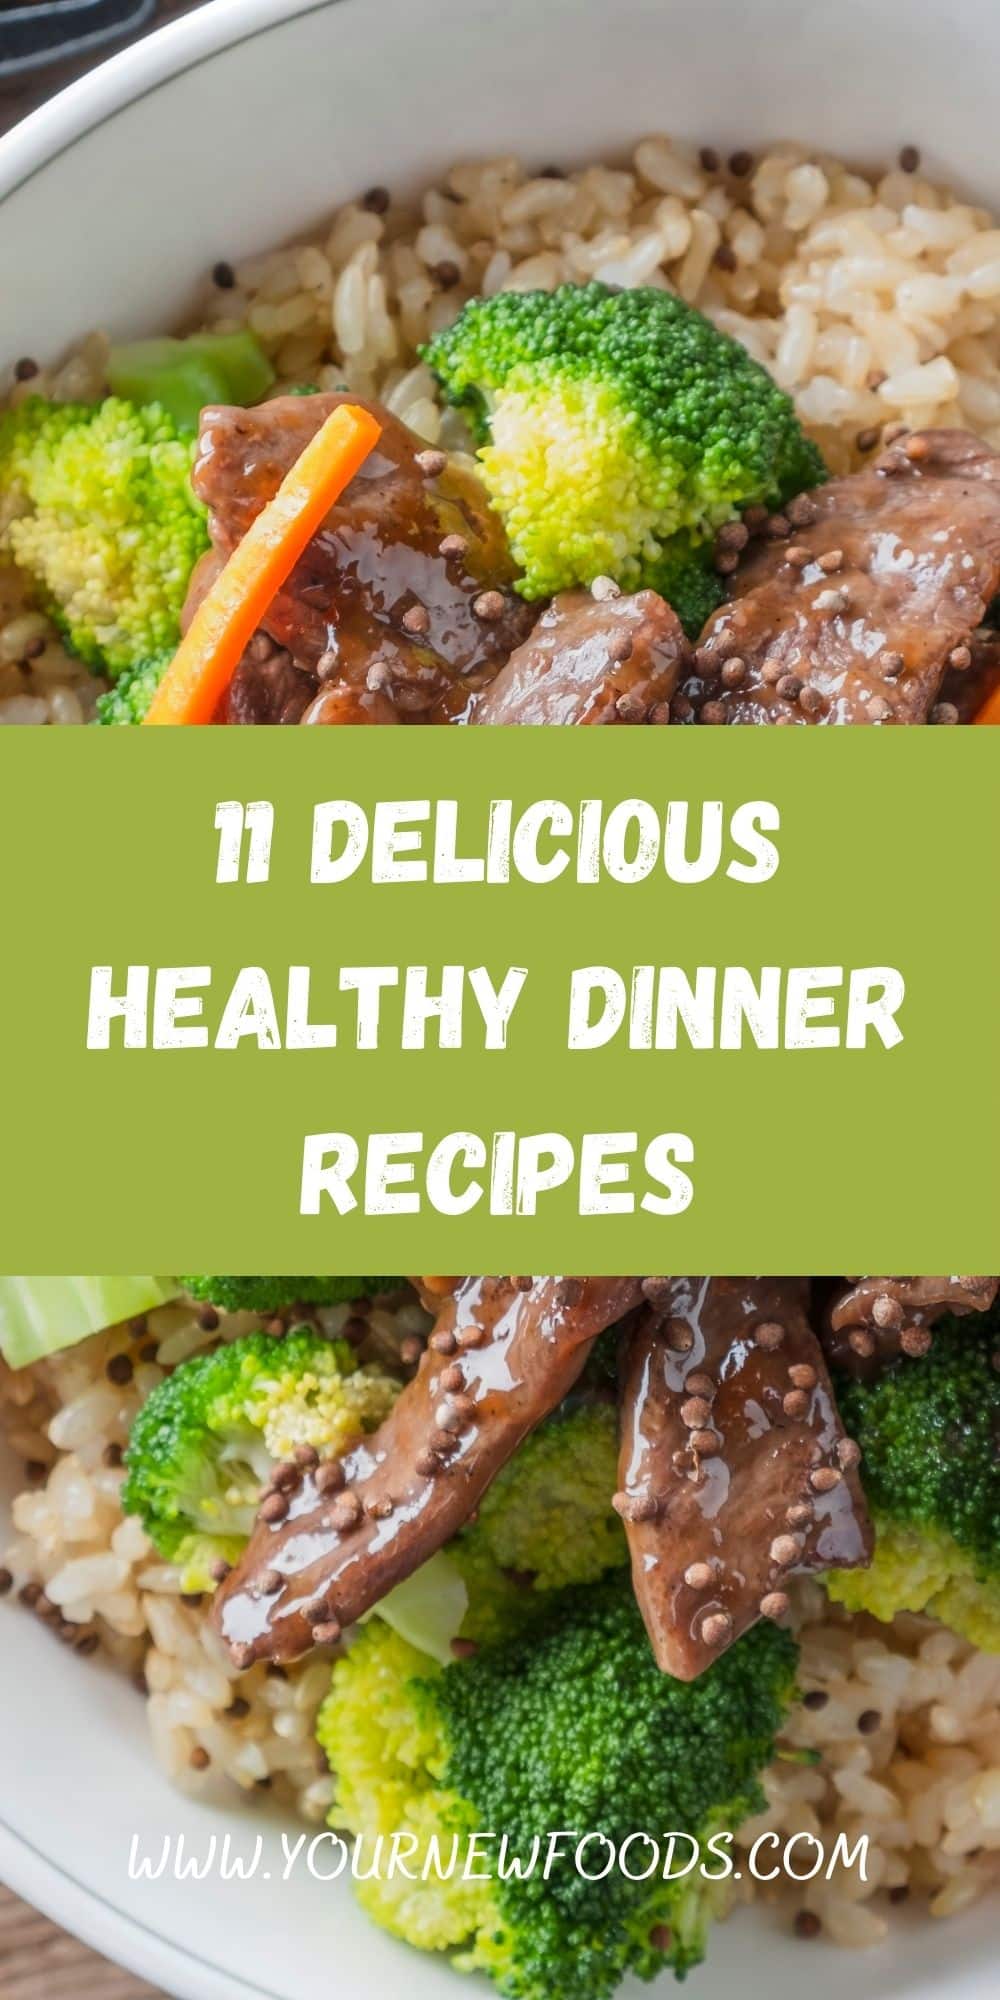 Healthy Recipes: Dinner beef, broccoli, carrot and rice in a white bowl